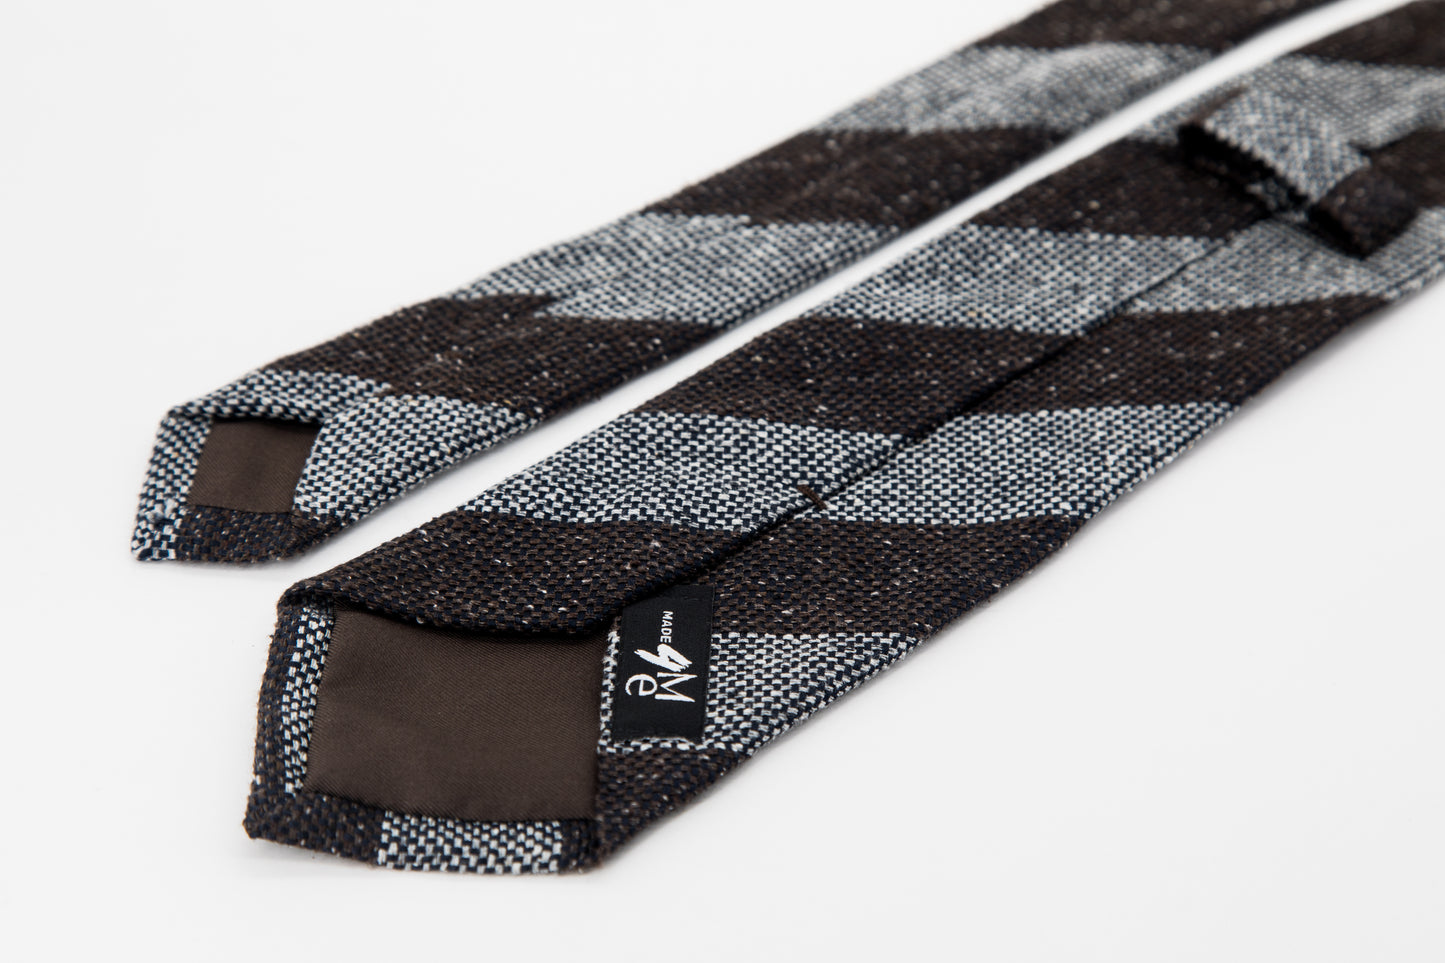 TIE - Large Black And Speckled White Stripe